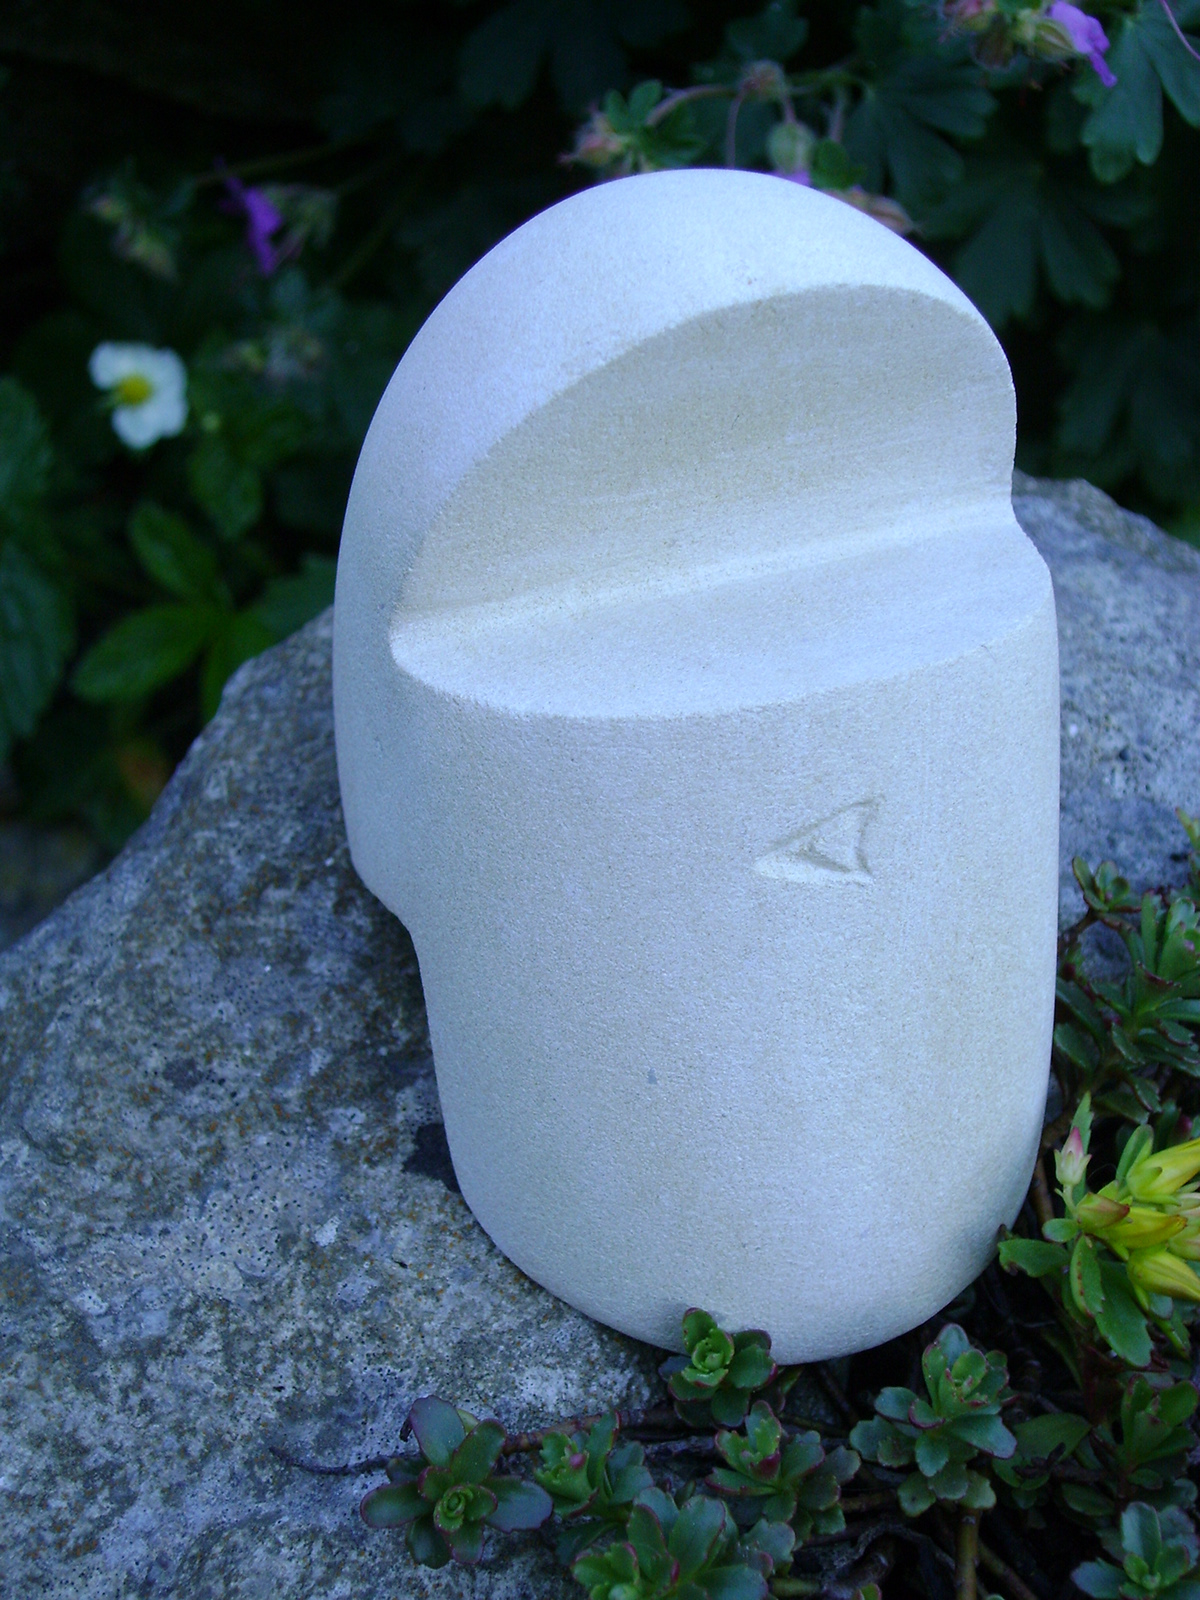 sculpture paper ornament small stone carving White Purbeck Dorset home